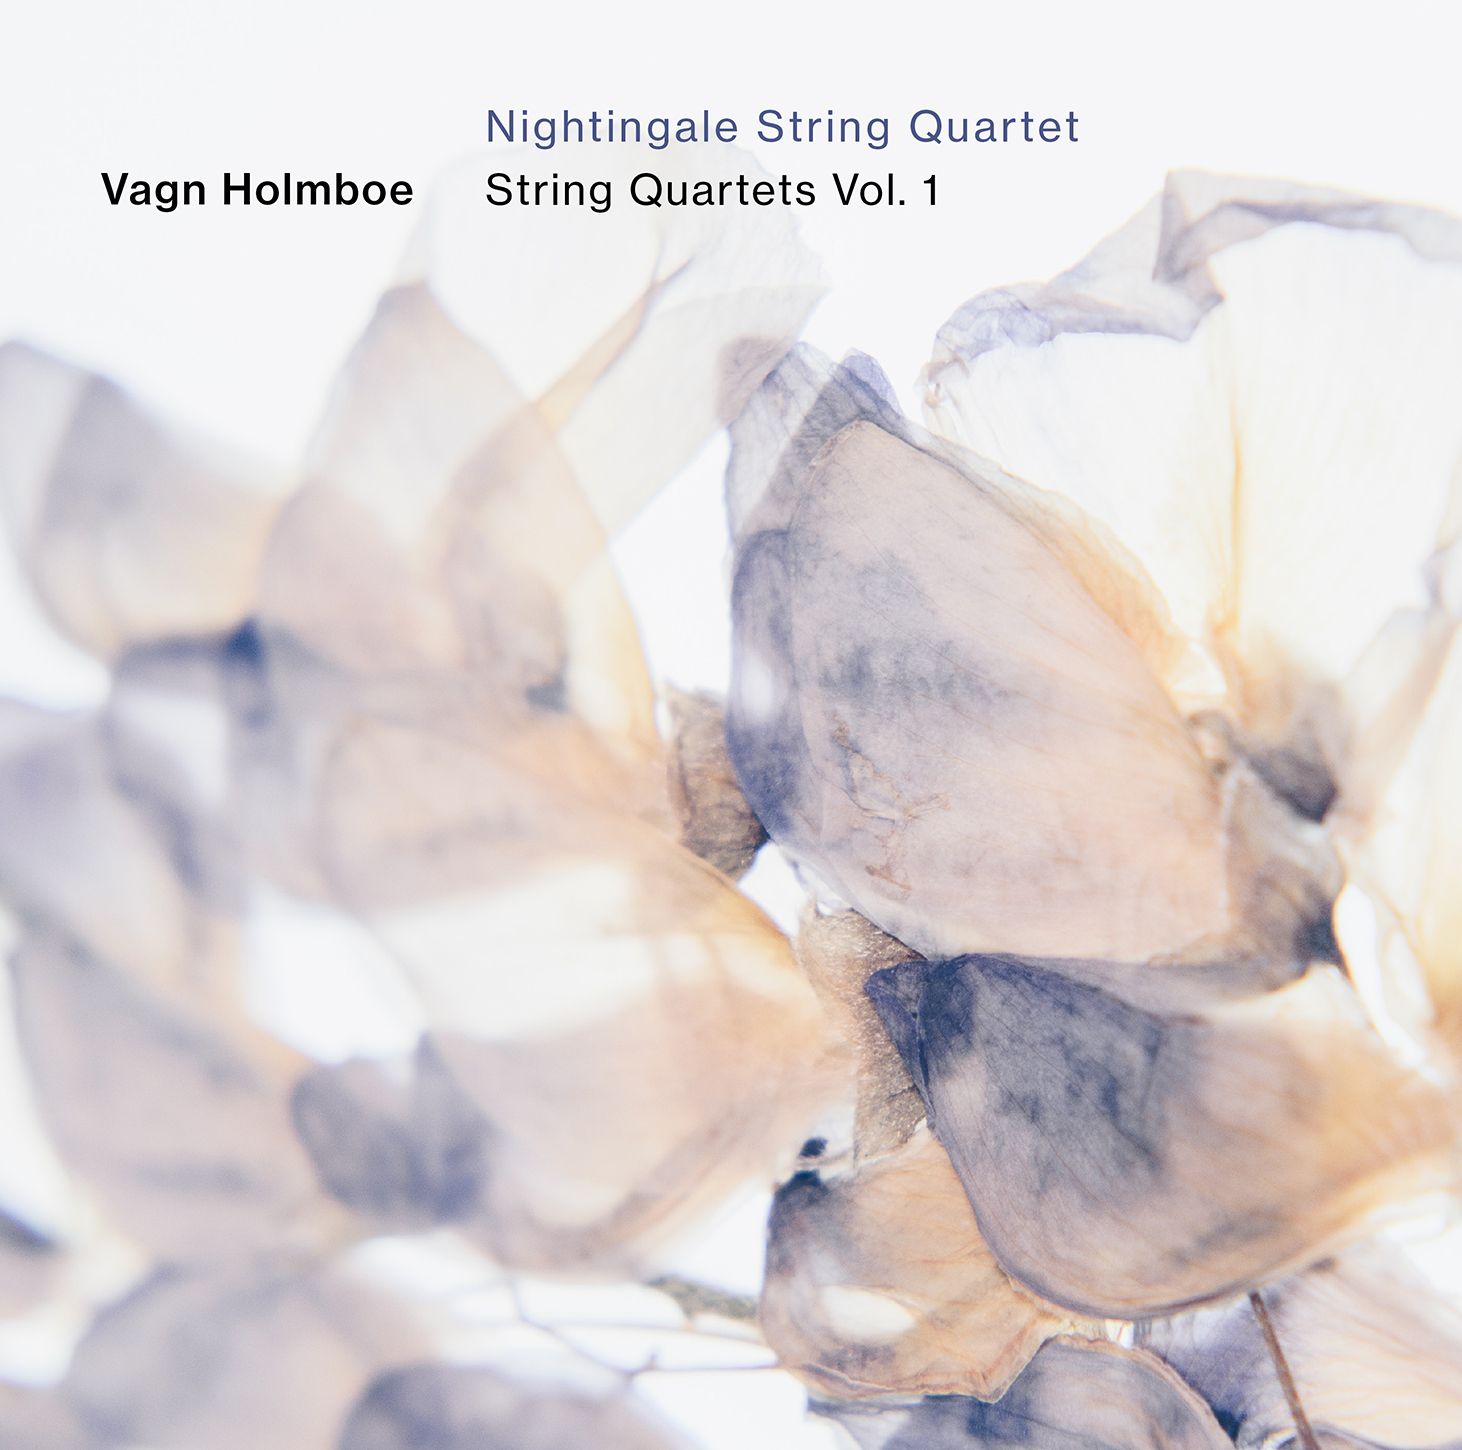 Sing like a Nightingale: Vagn Holmboe and the string quartet